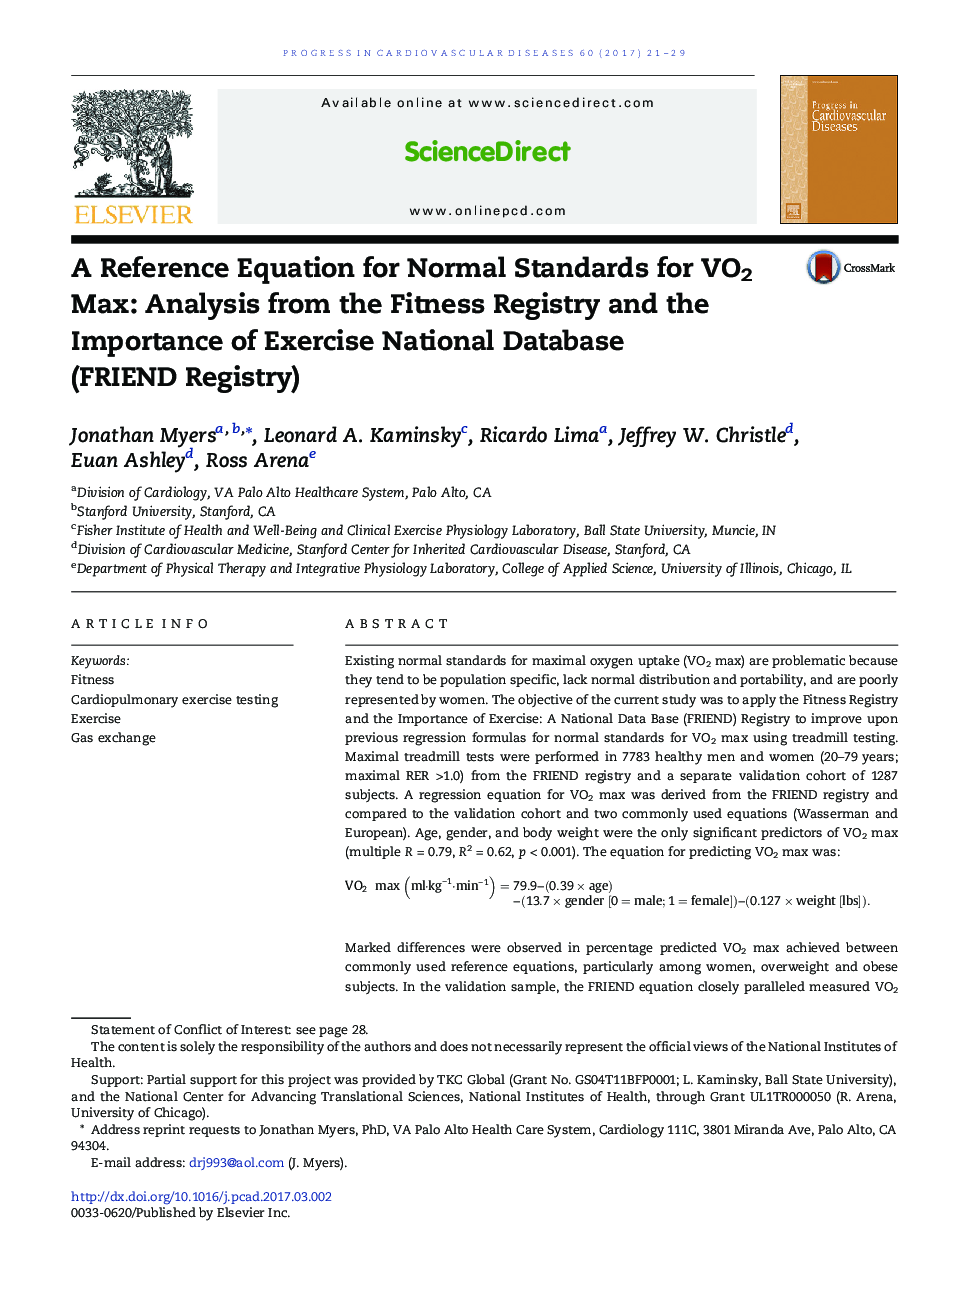 A Reference Equation for Normal Standards for VO2 Max: Analysis from the Fitness Registry and the Importance of Exercise National Database (FRIEND Registry)